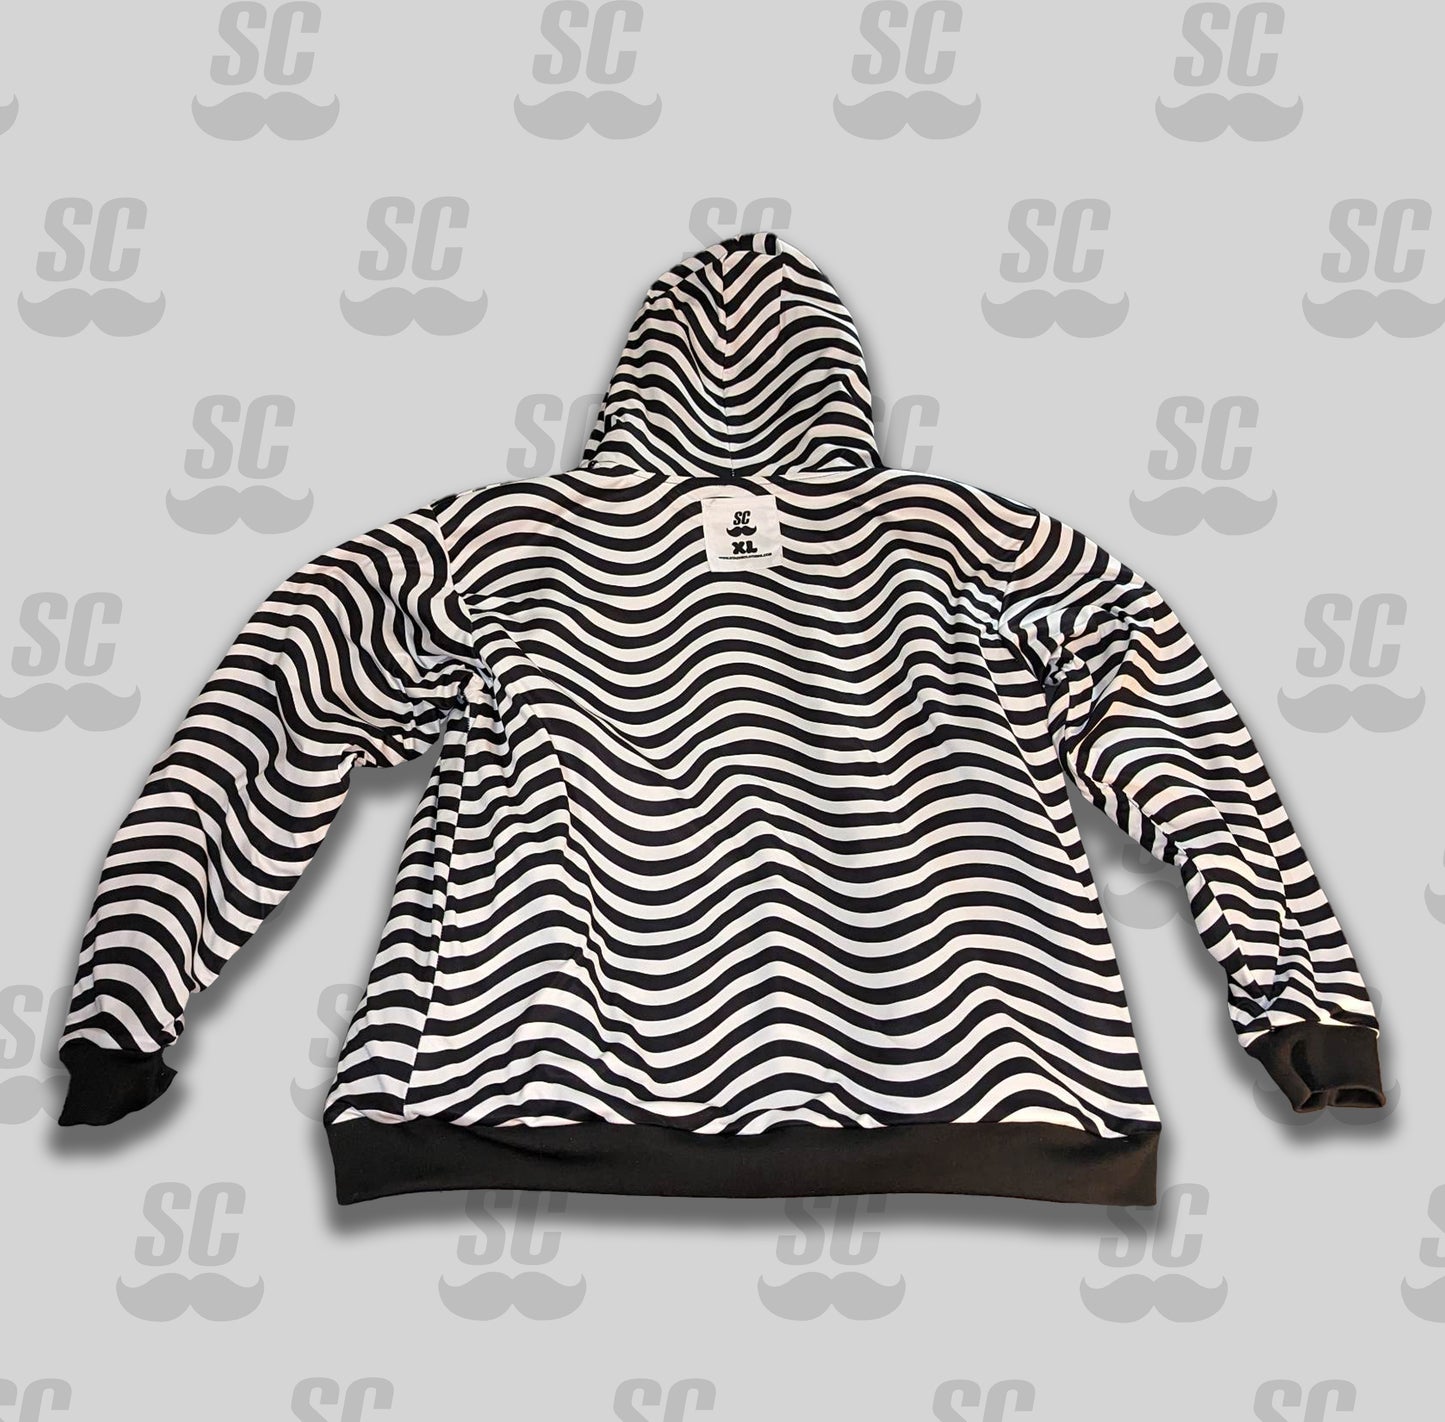 SC reversible black and white trippy hoodie